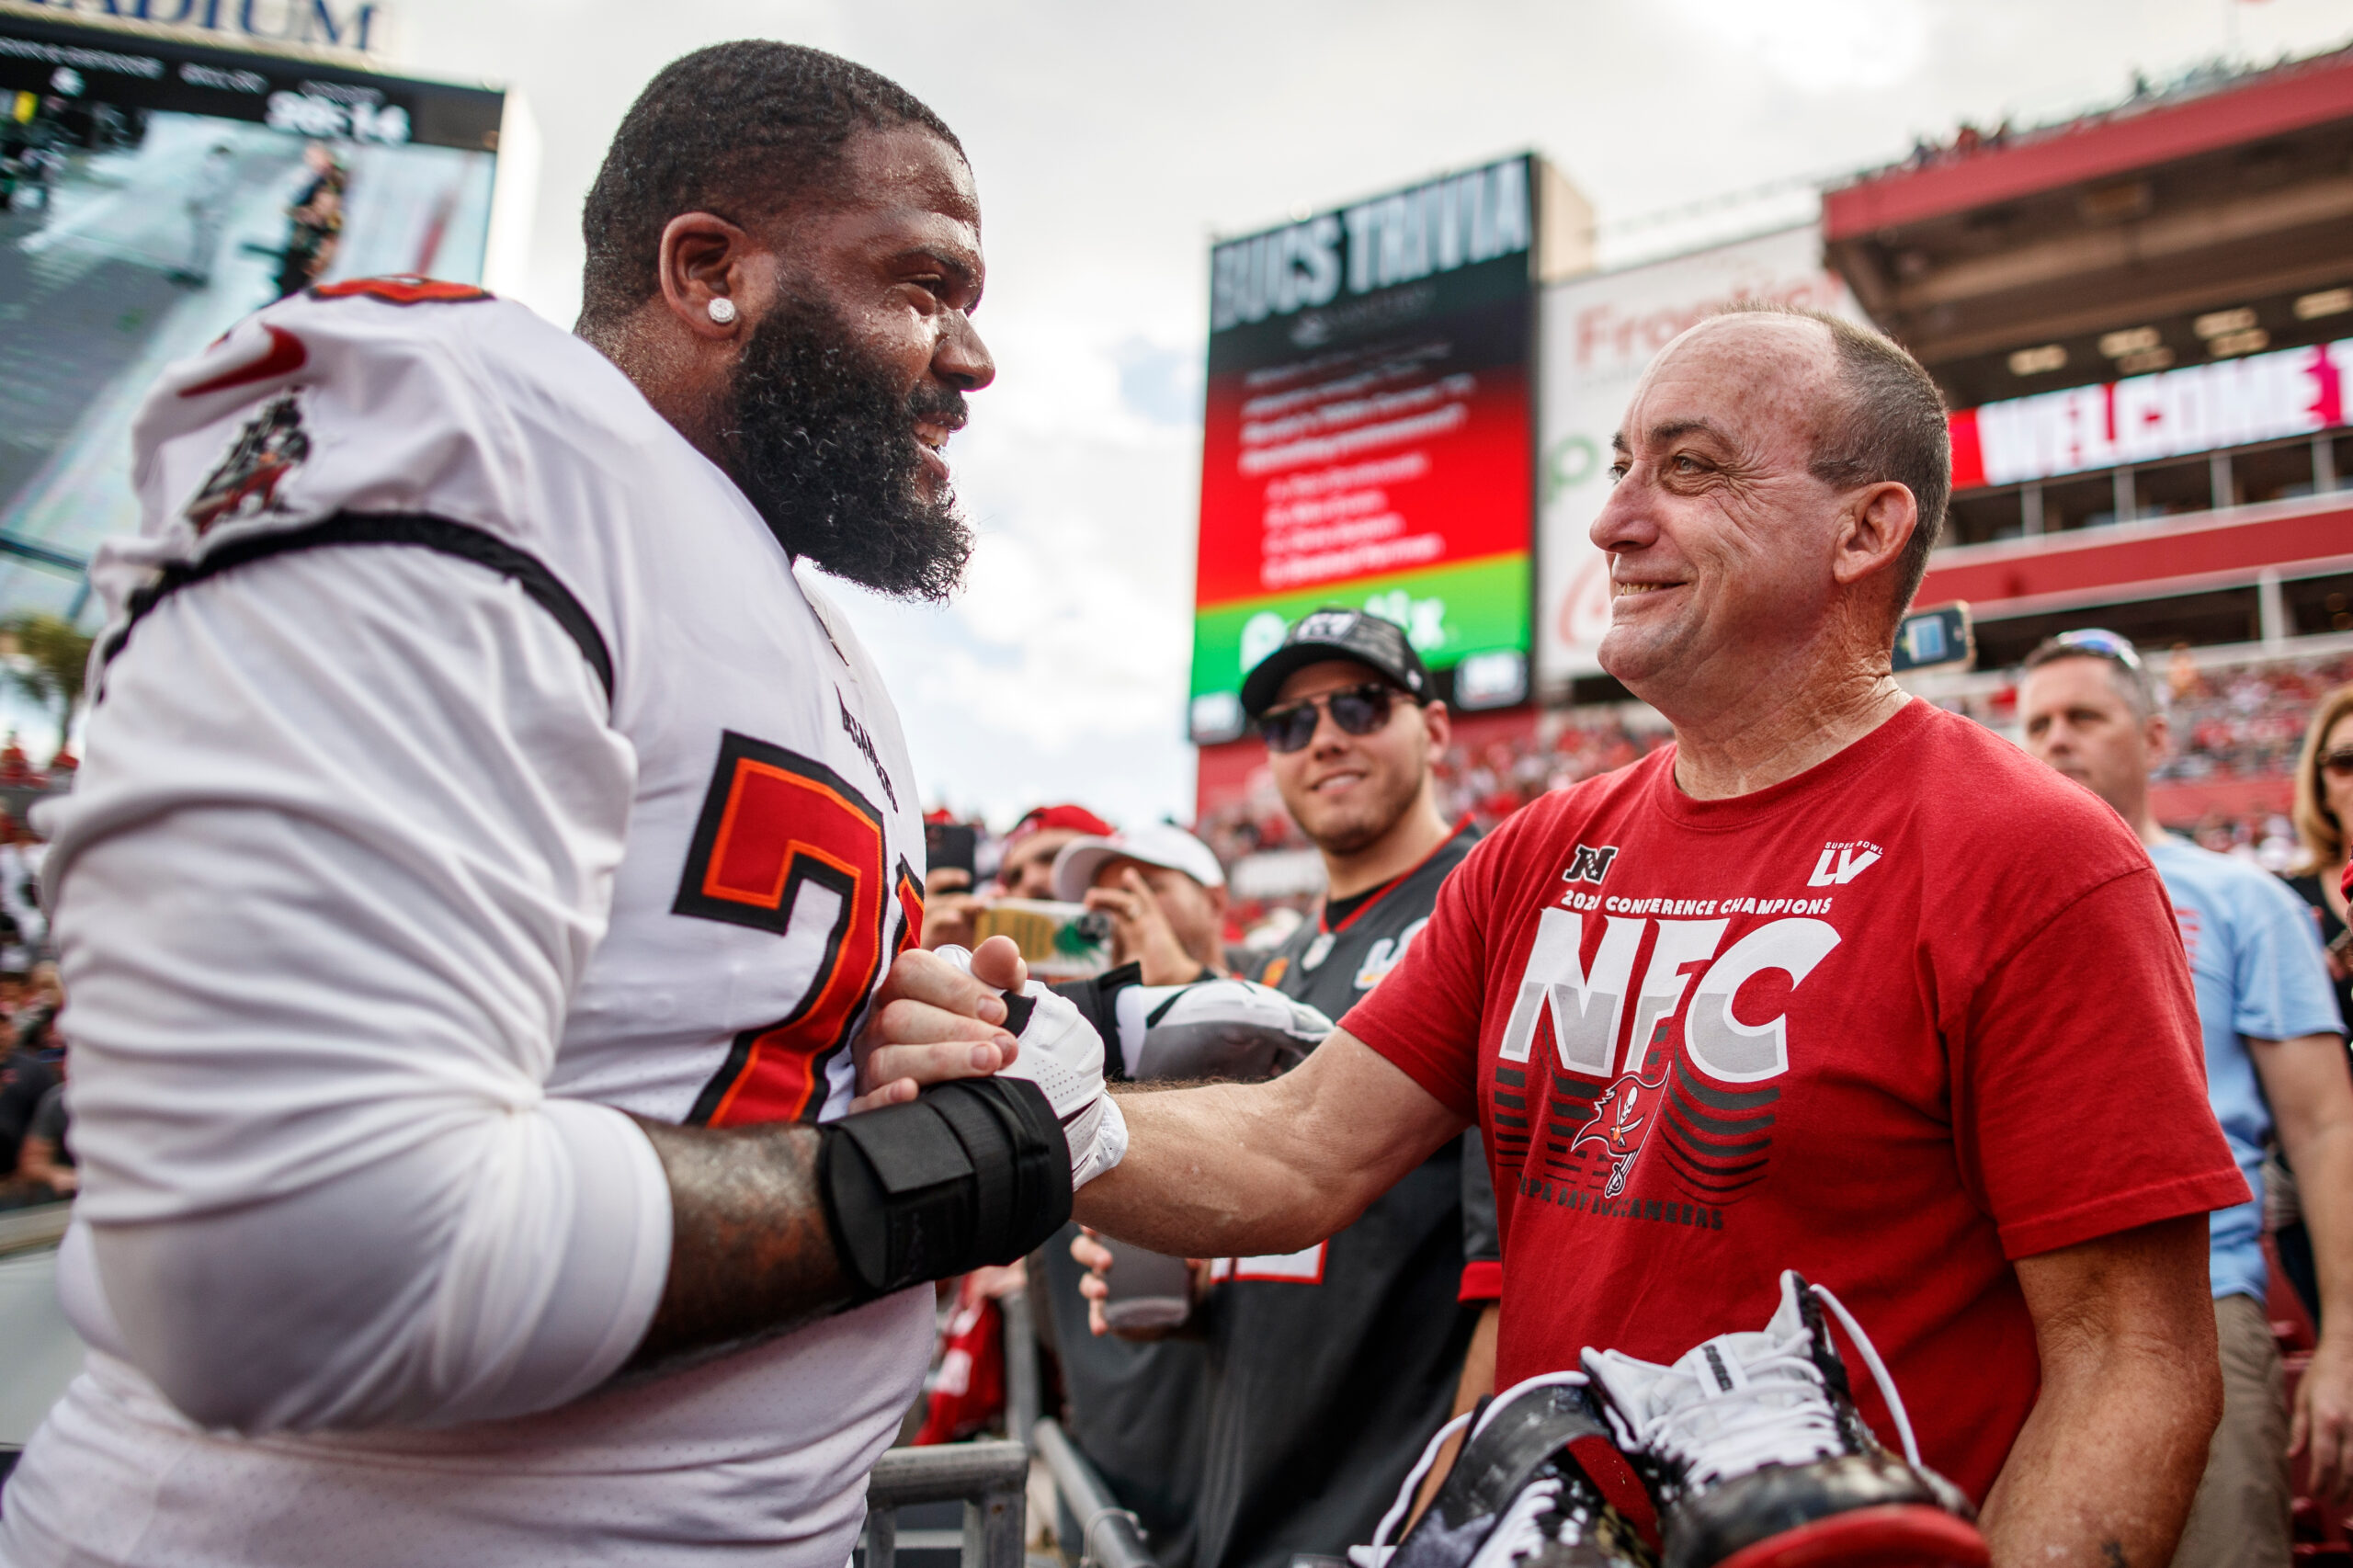 Tampa Bay Buccaneers player Donovan Smith gives custom cleats to Robert DuBoise before the game between the Carolina Panthers and Tampa Bay Buccaneers at Raymond James Stadium in Tampa, Florida, on Jan. 9, 2022. (Image: Kyle Zedaker/Tampa Bay Buccaneers)